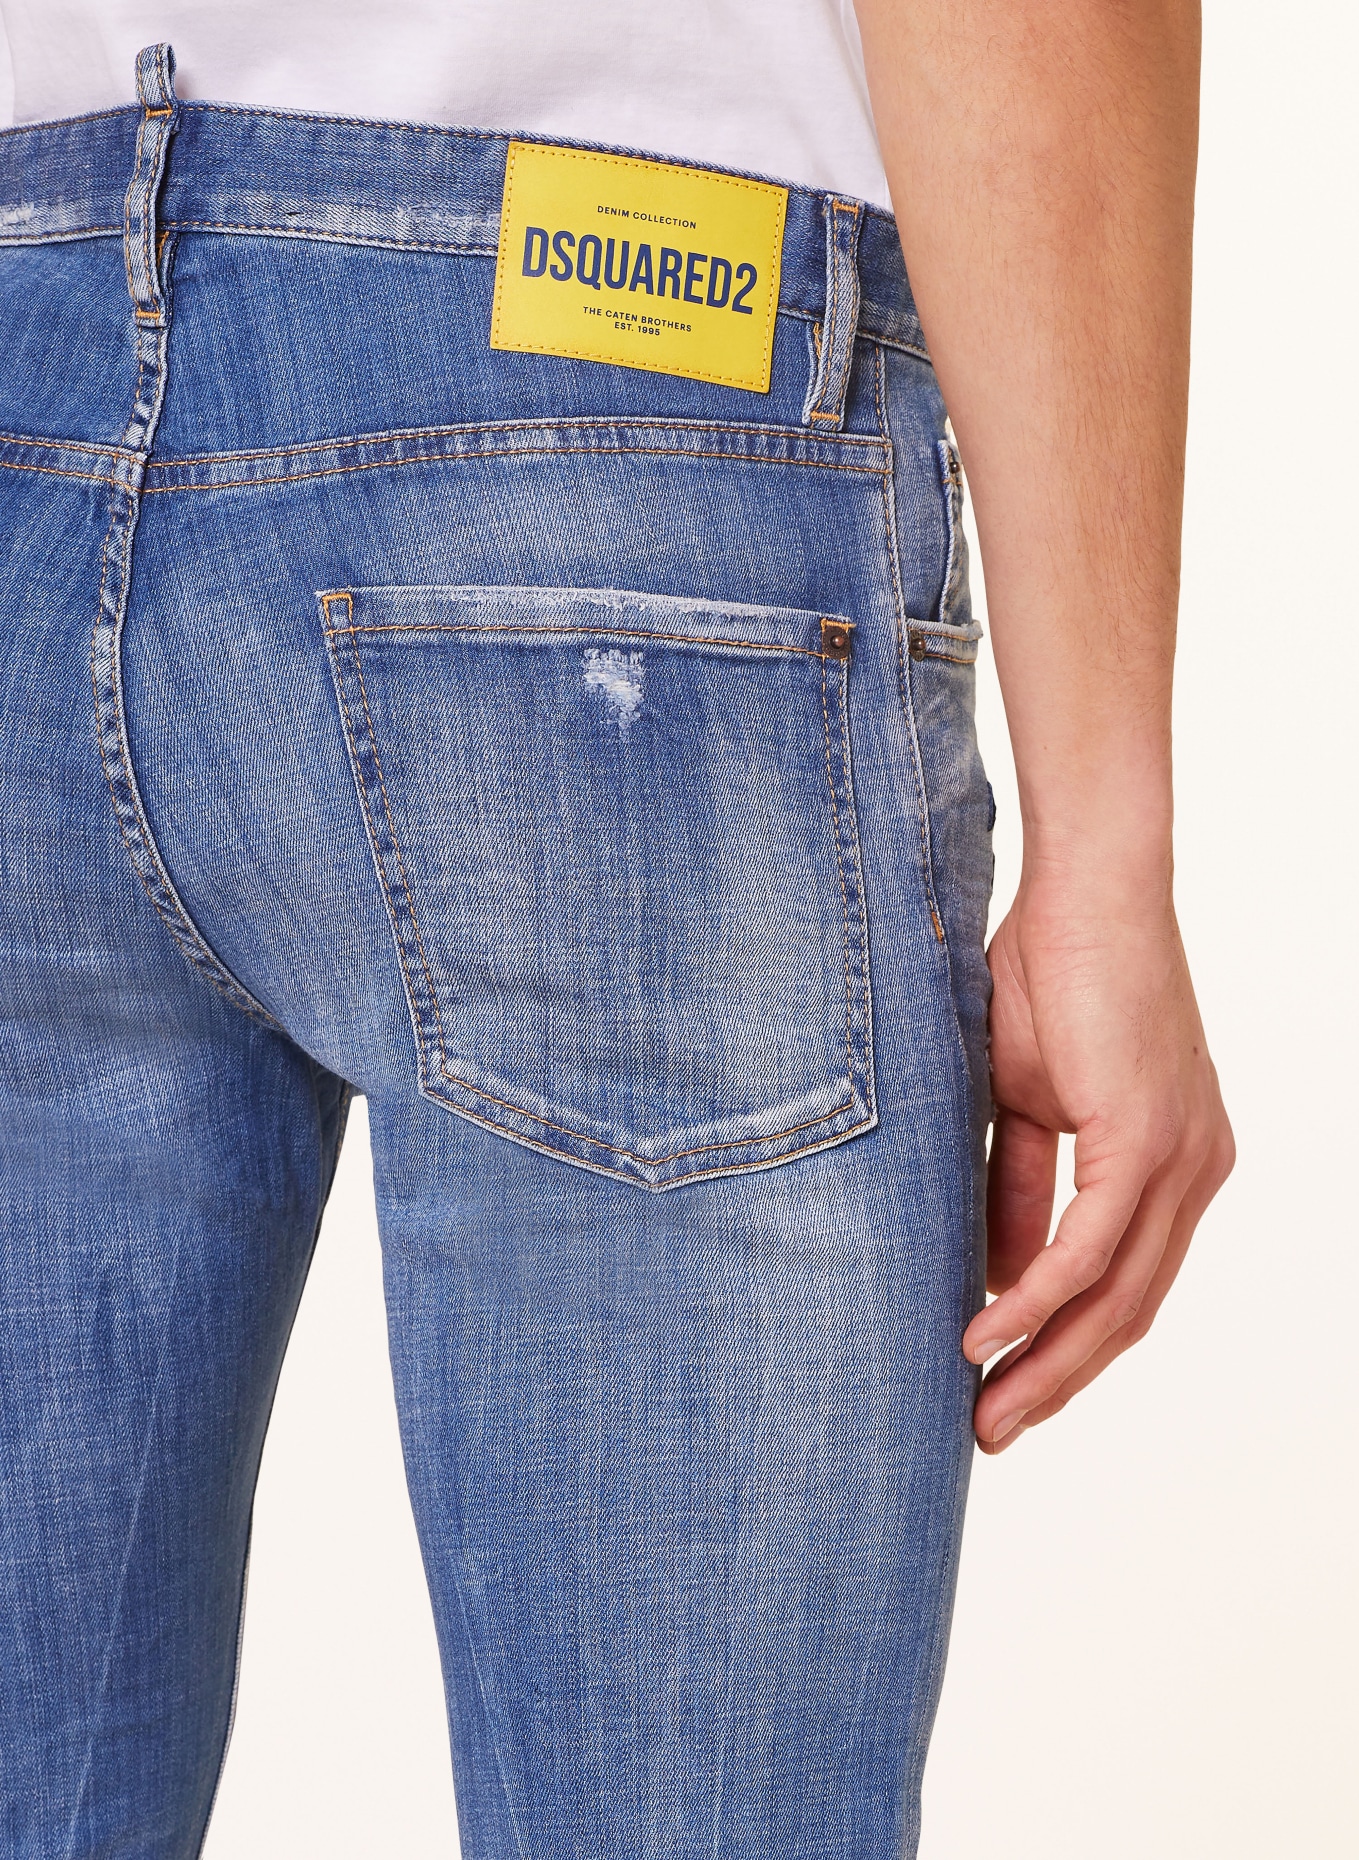 DSQUARED2 Destroyed Jeans COOL GUY Extra Slim Fit, Farbe: 470 BLUE NAVY (Bild 5)